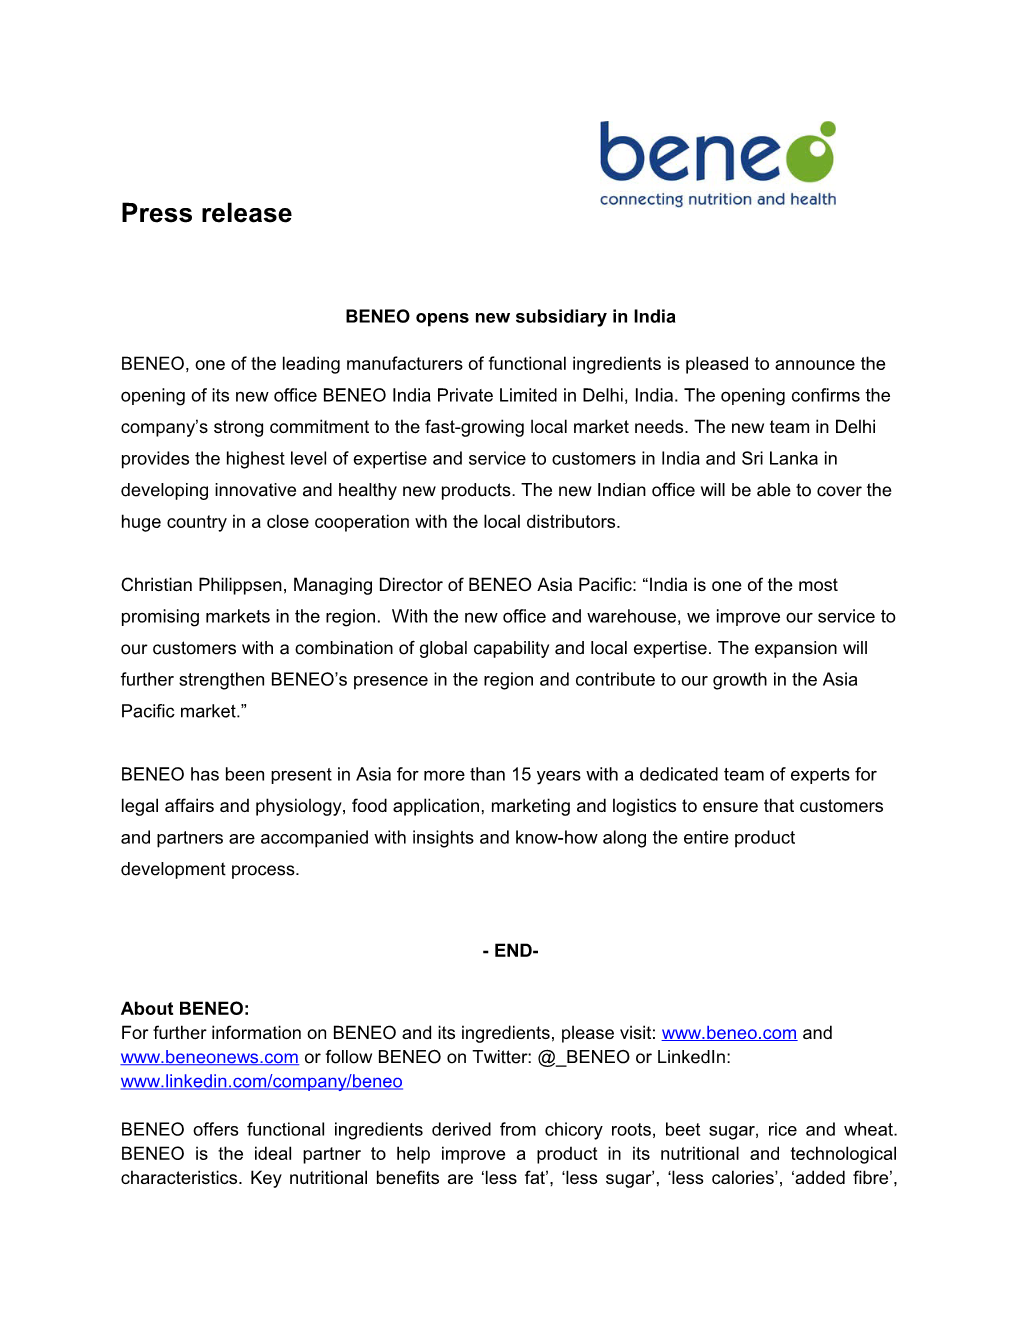 BENEO Opens New Subsidiary in India